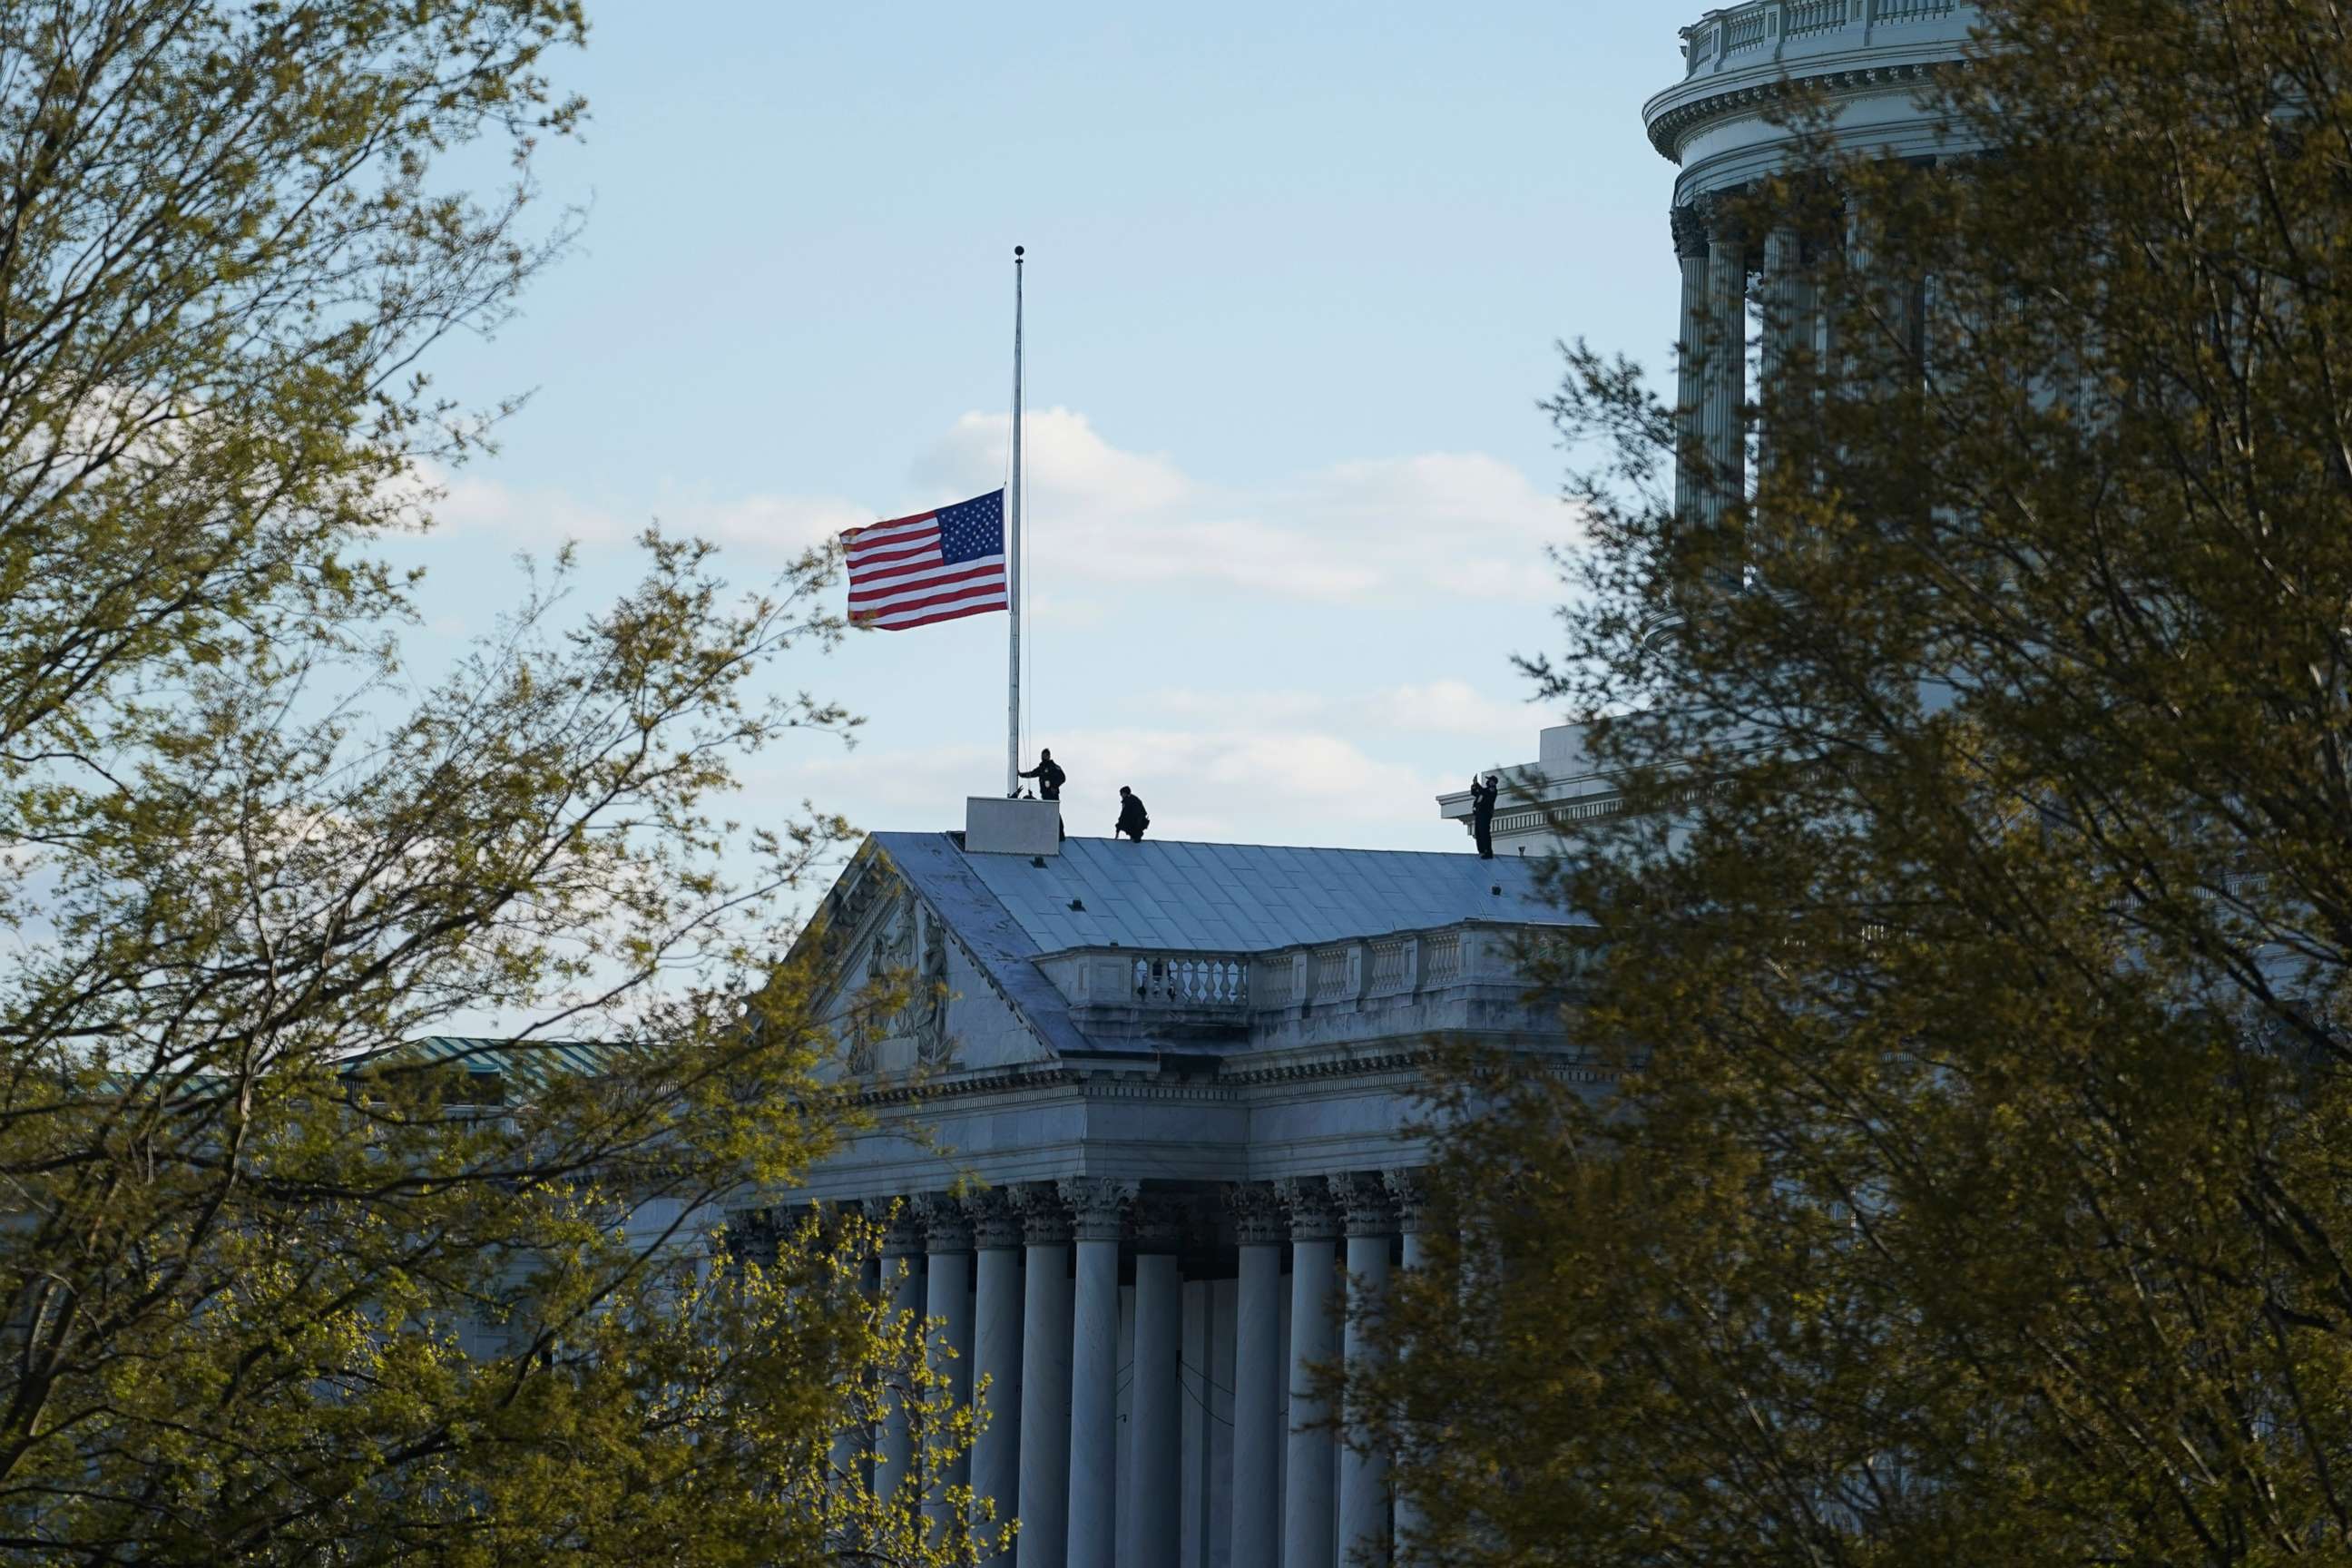 PHOTO: The American flag at the U.S. Capitol flies at half-staff in honor of Capitol Police officer William Evans who was killed after a man rammed a car into two officers at a barricade outside the U.S. Capitol, April 2, 2021.